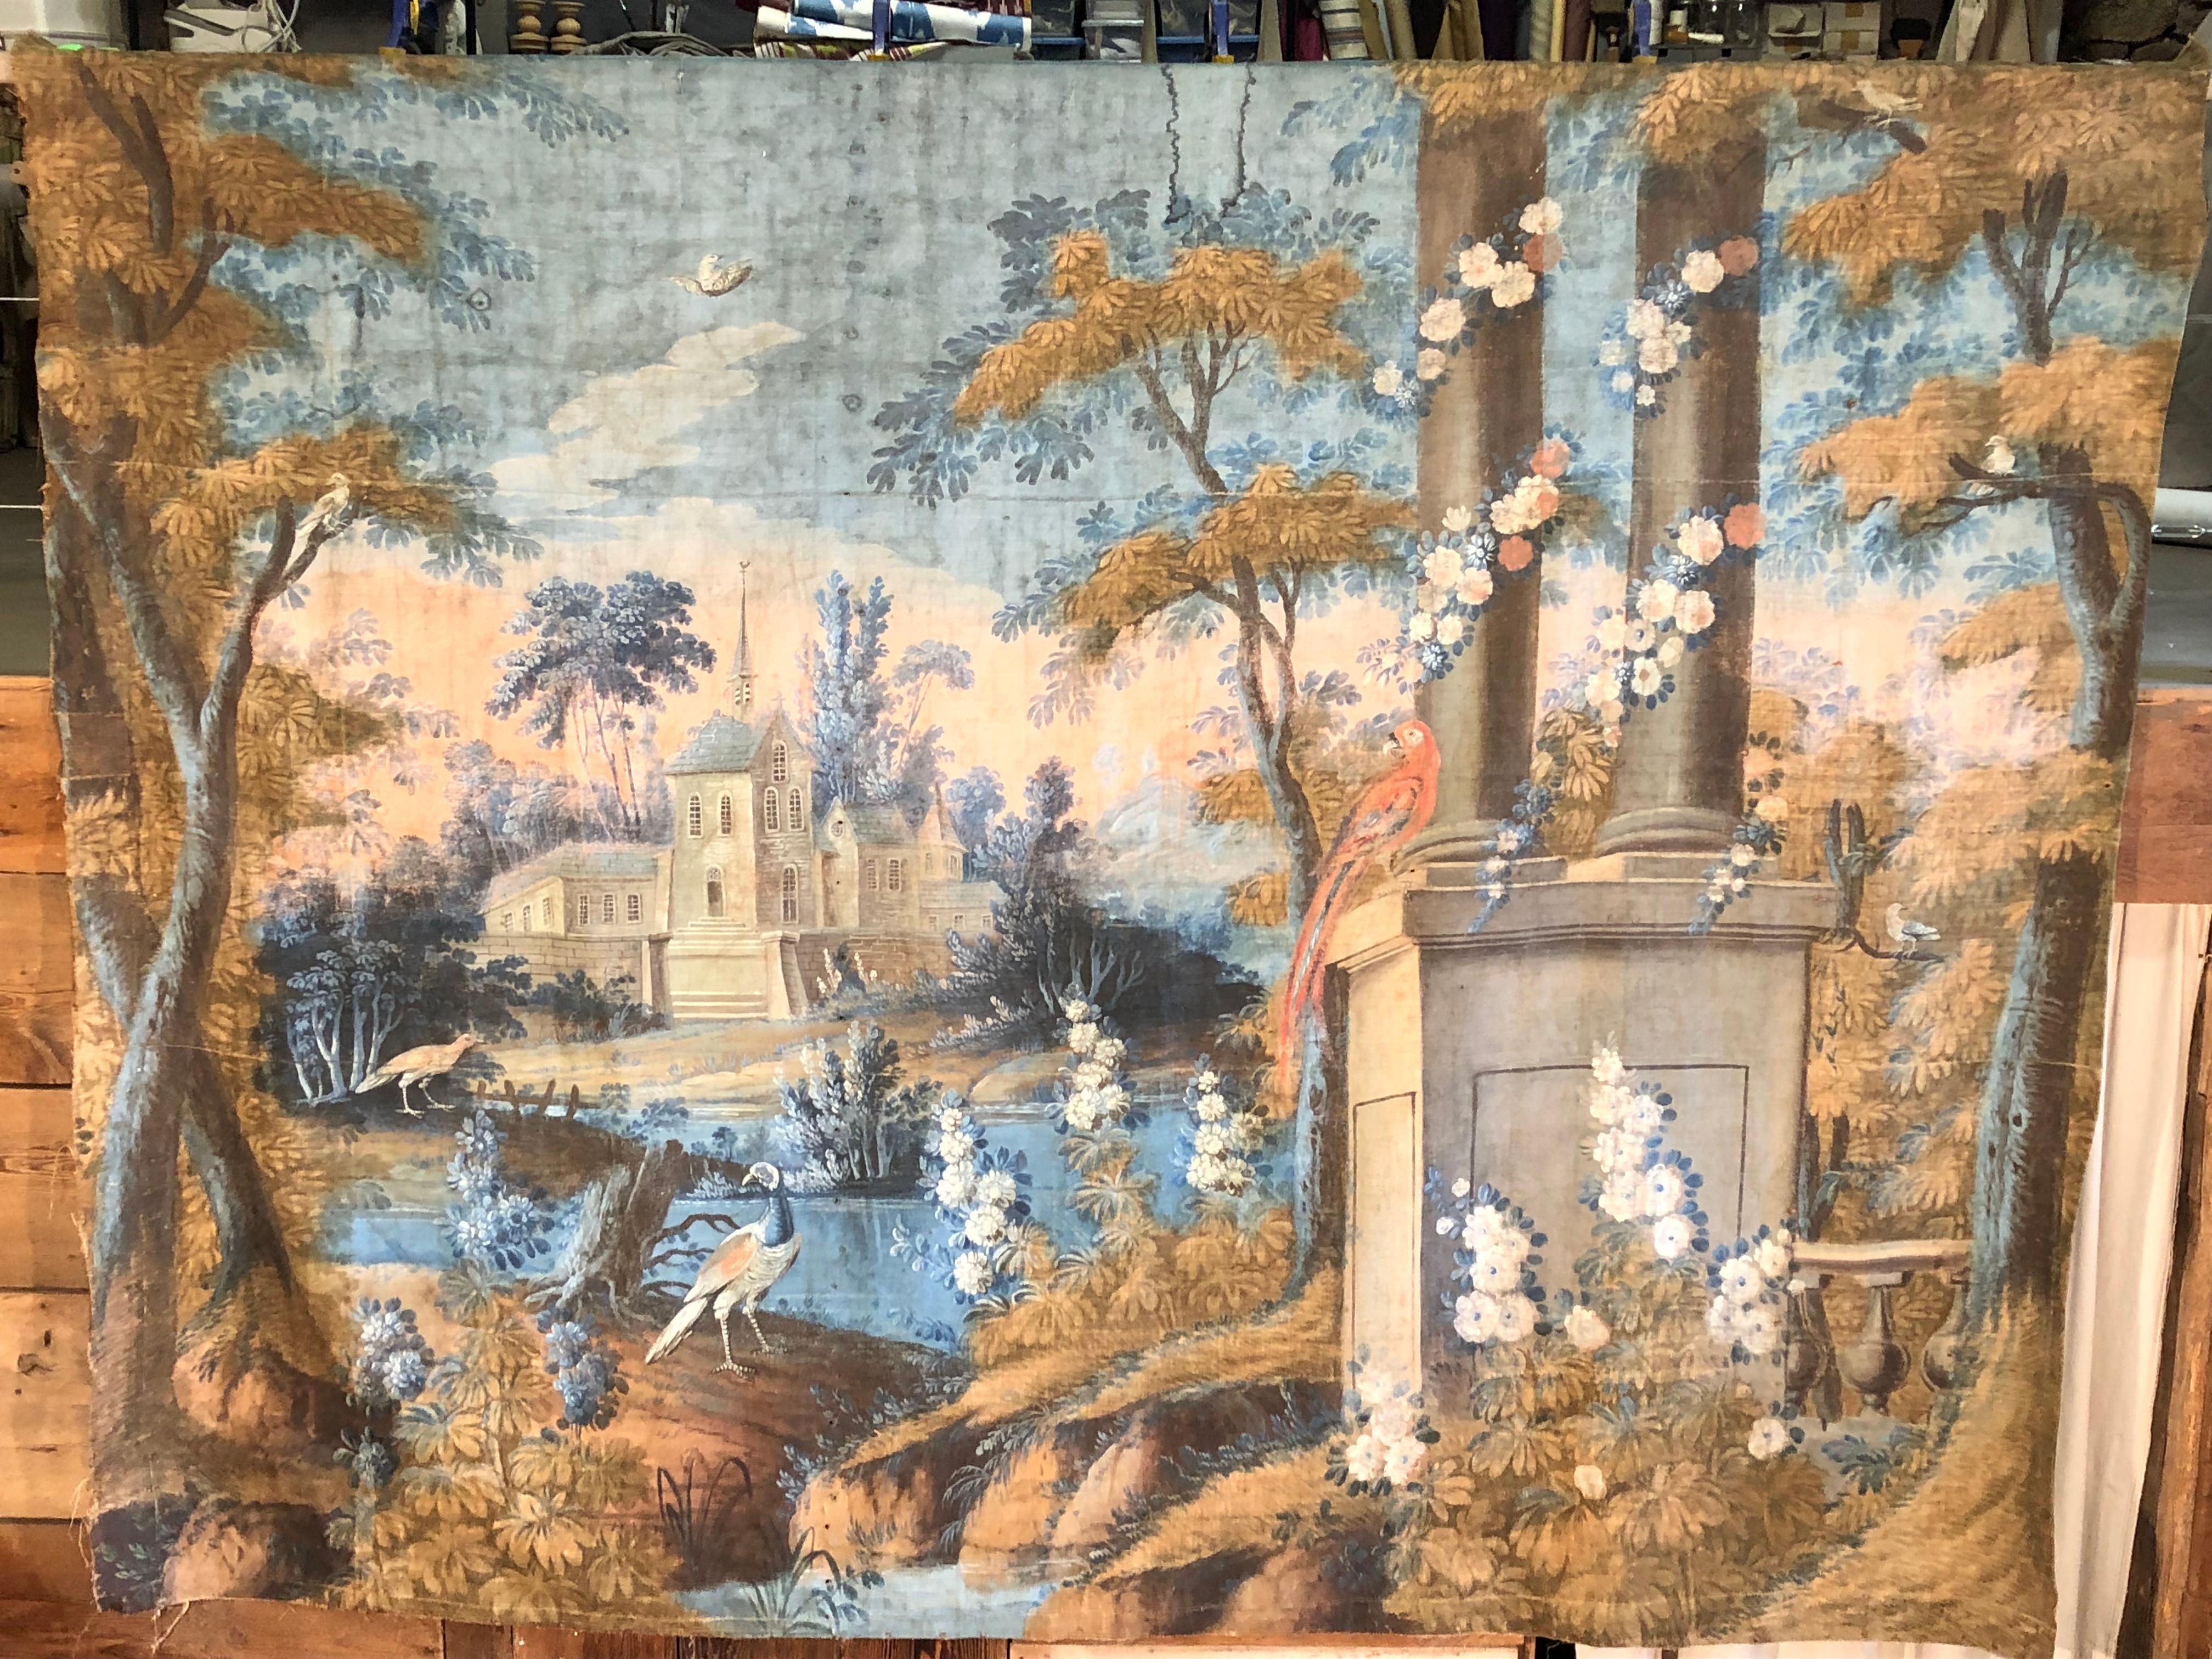 An important and rare room size French 18th century “toile peinte” tapestry, depicting a fantasy landscape and village scene, with birds, trees, flowers etc., attributed to the Tournemine workshop, in Angers, France, by artist Coulet de Beauregard,